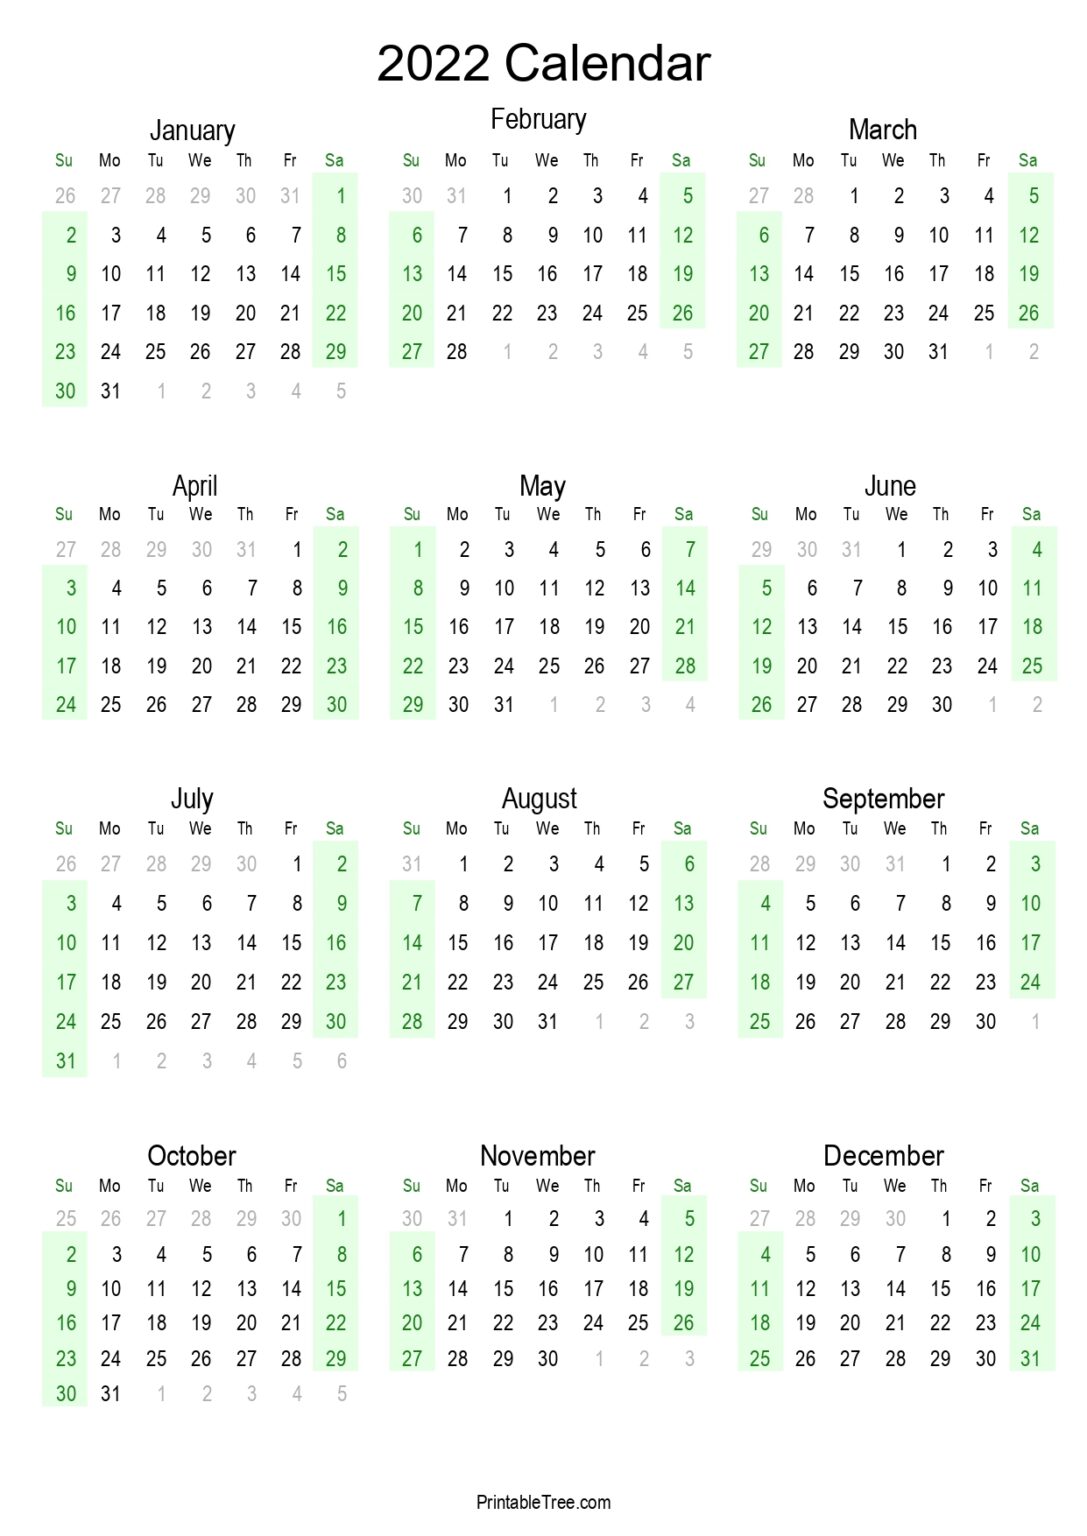 Printable Calendar 2022 One Page with Holidays (Single Page) 2022